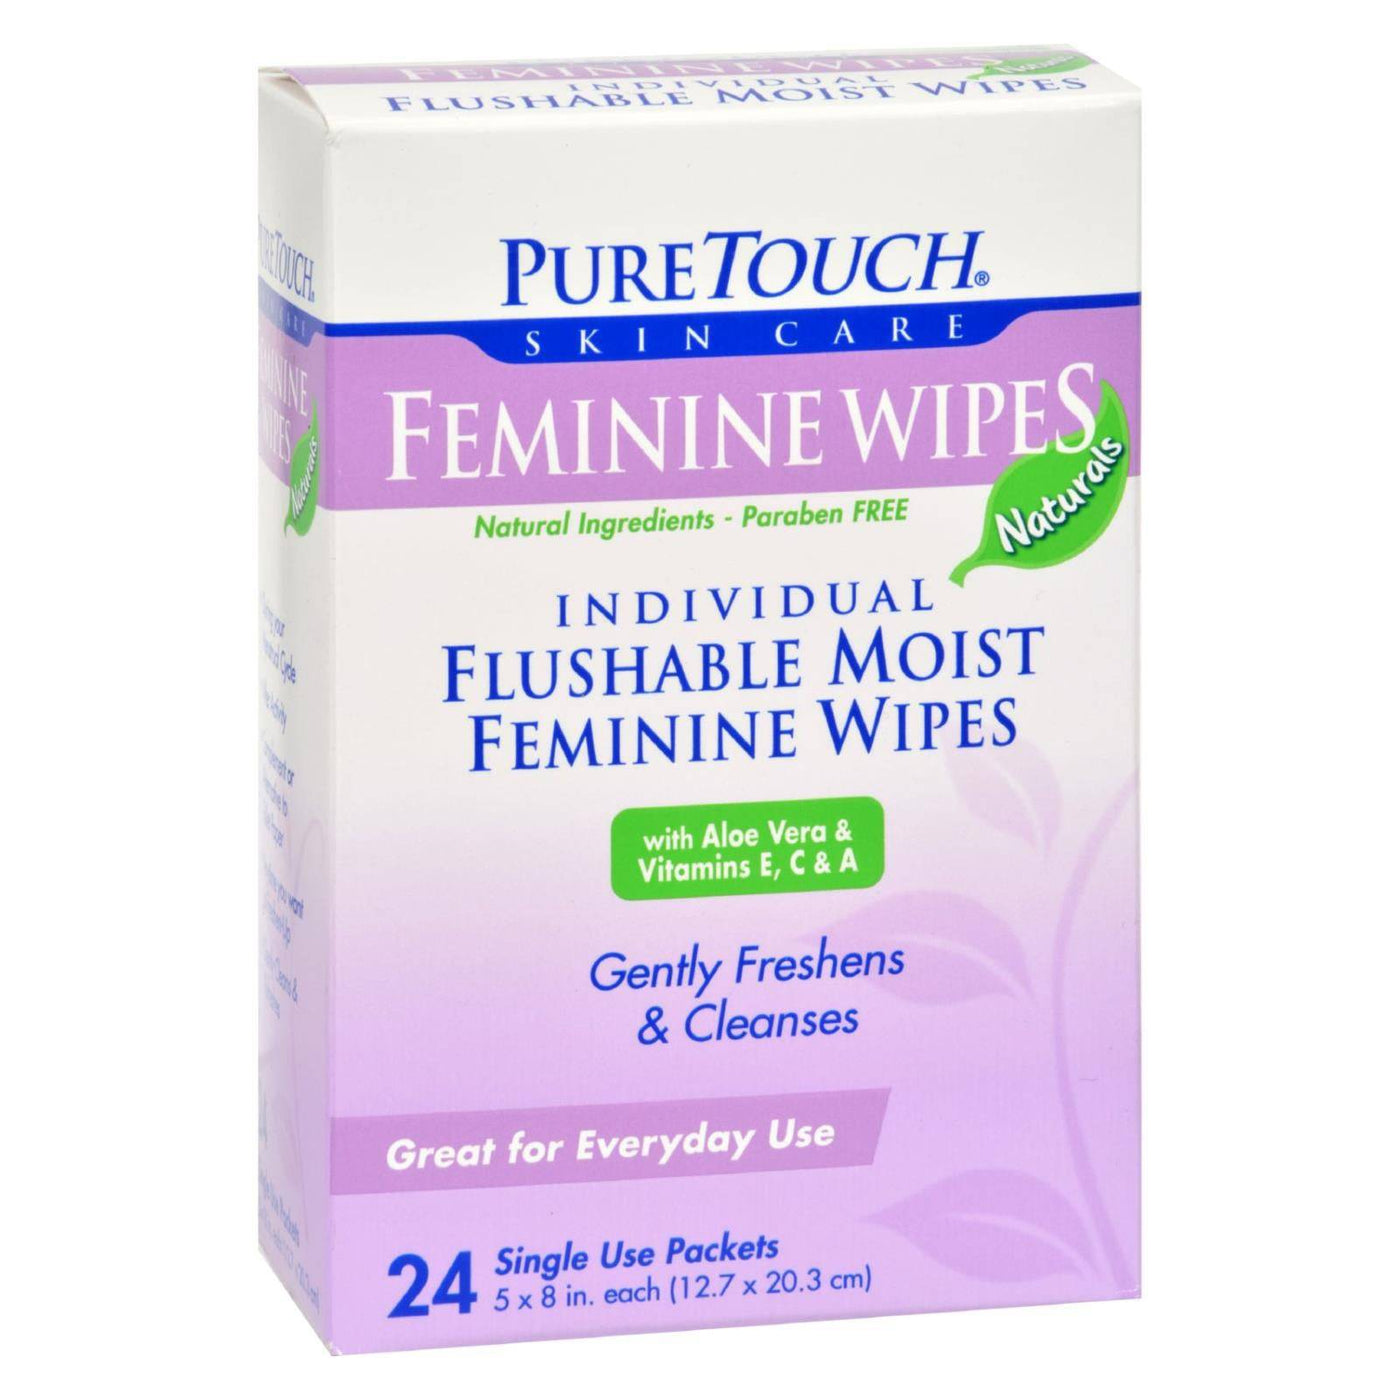 Puretouch Feminine Wipes Flushable - 24 Wipes | OnlyNaturals.us